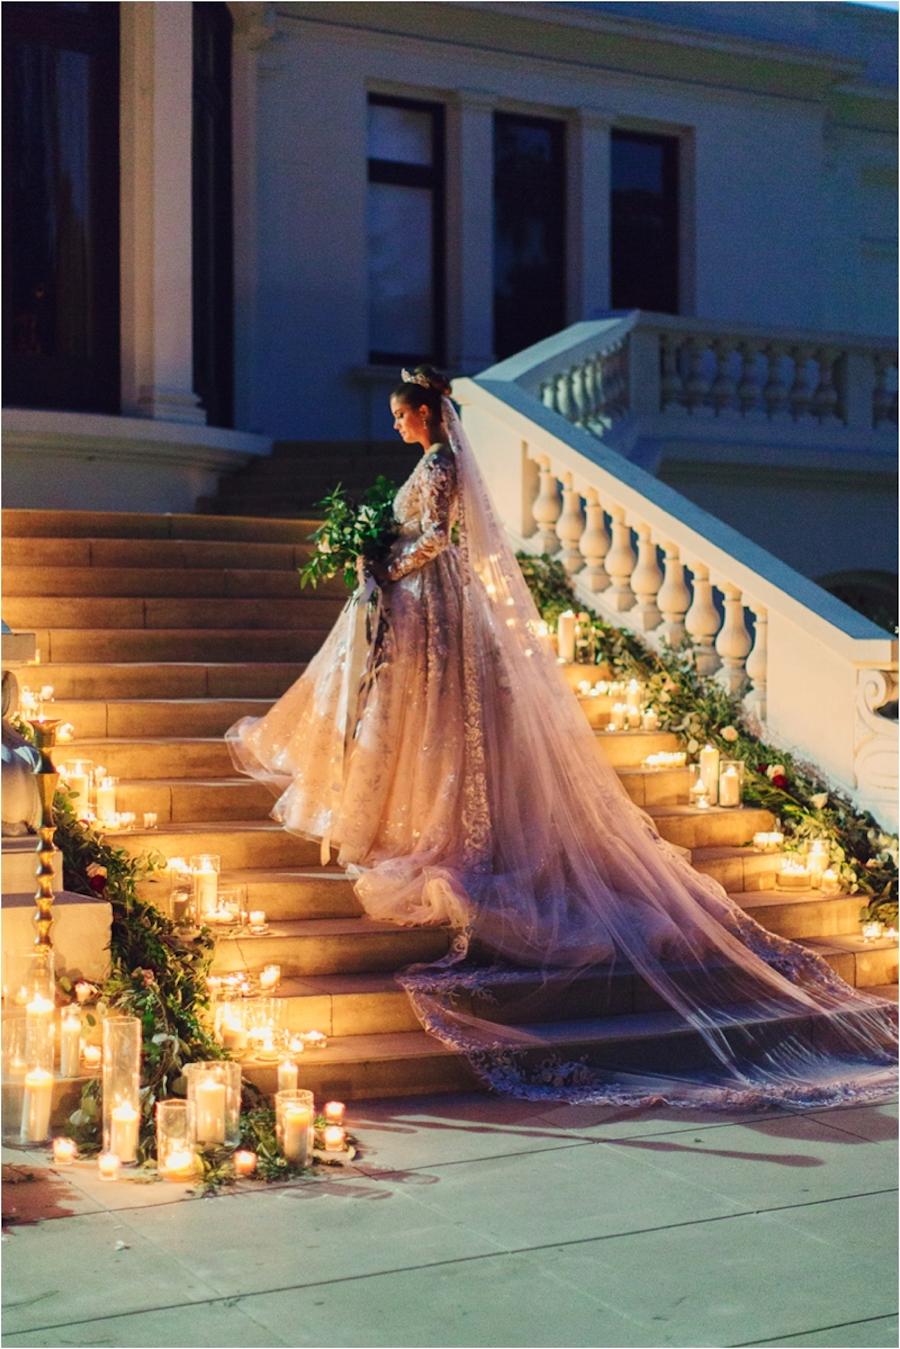 Unique Wedding Lighting Ideas That Will Seriously Impress Your Guests